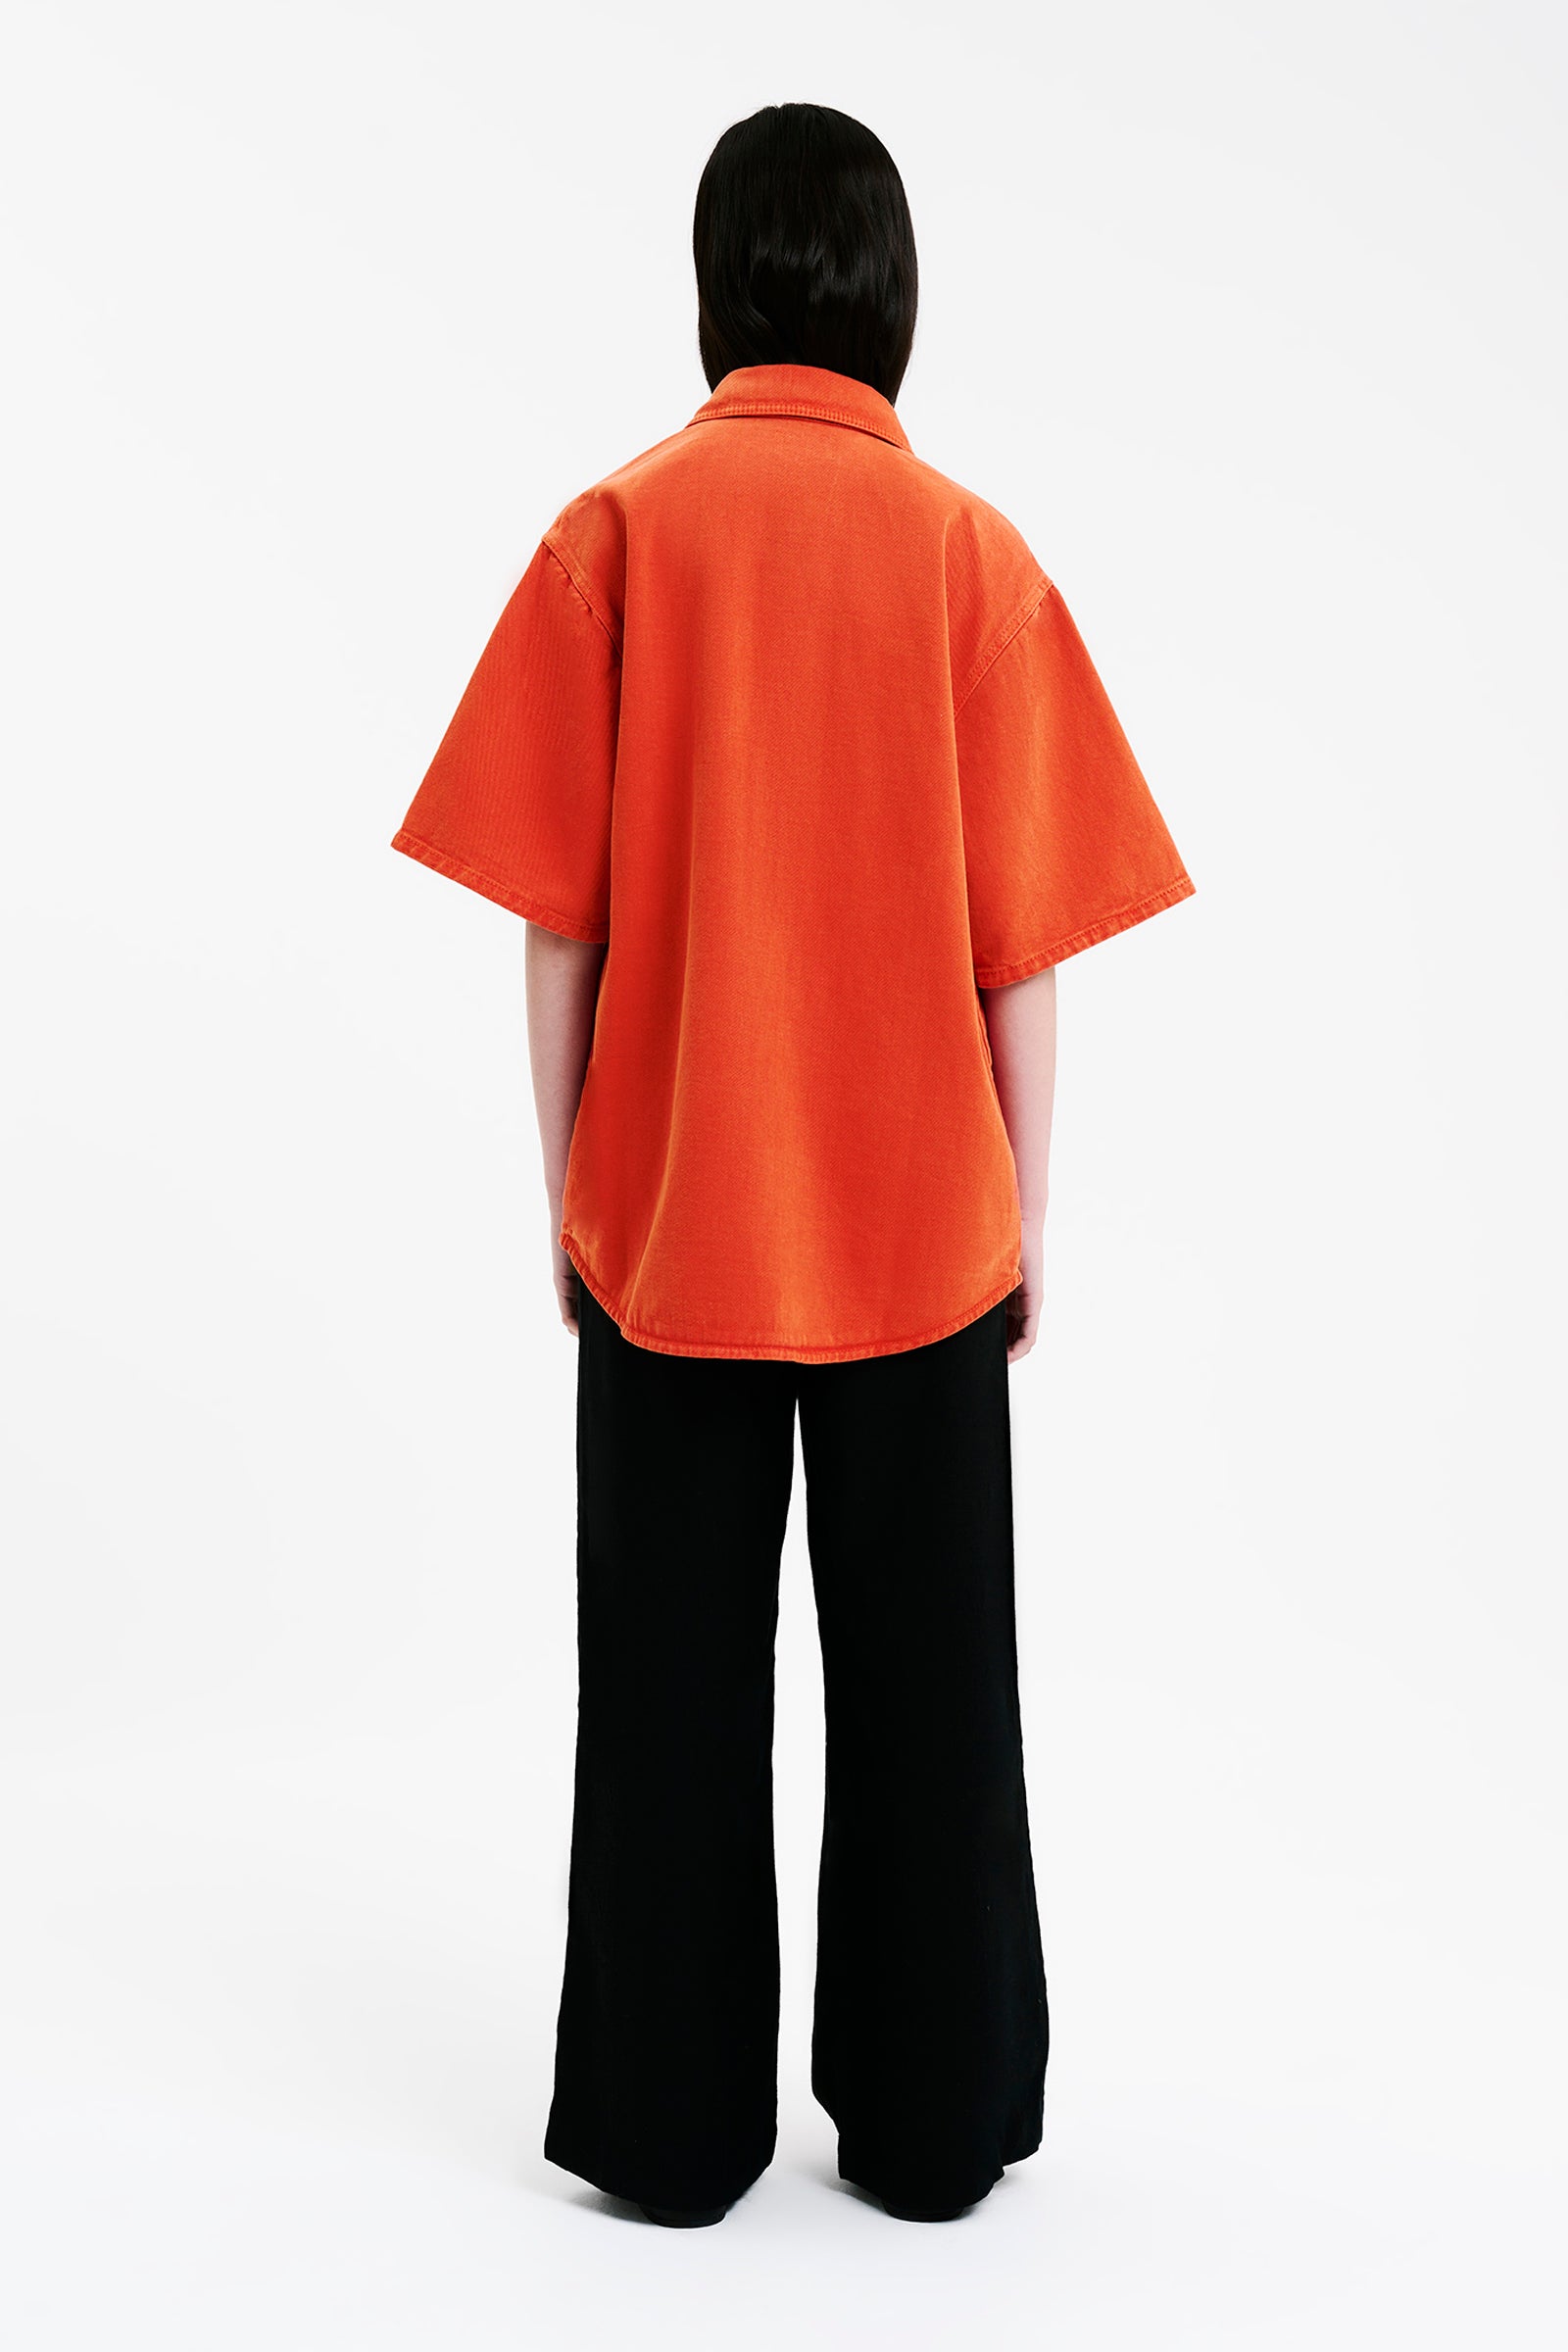 Nude Lucy Blaise Oversized Shirt in a Pink & Orange Toned Coral Colour